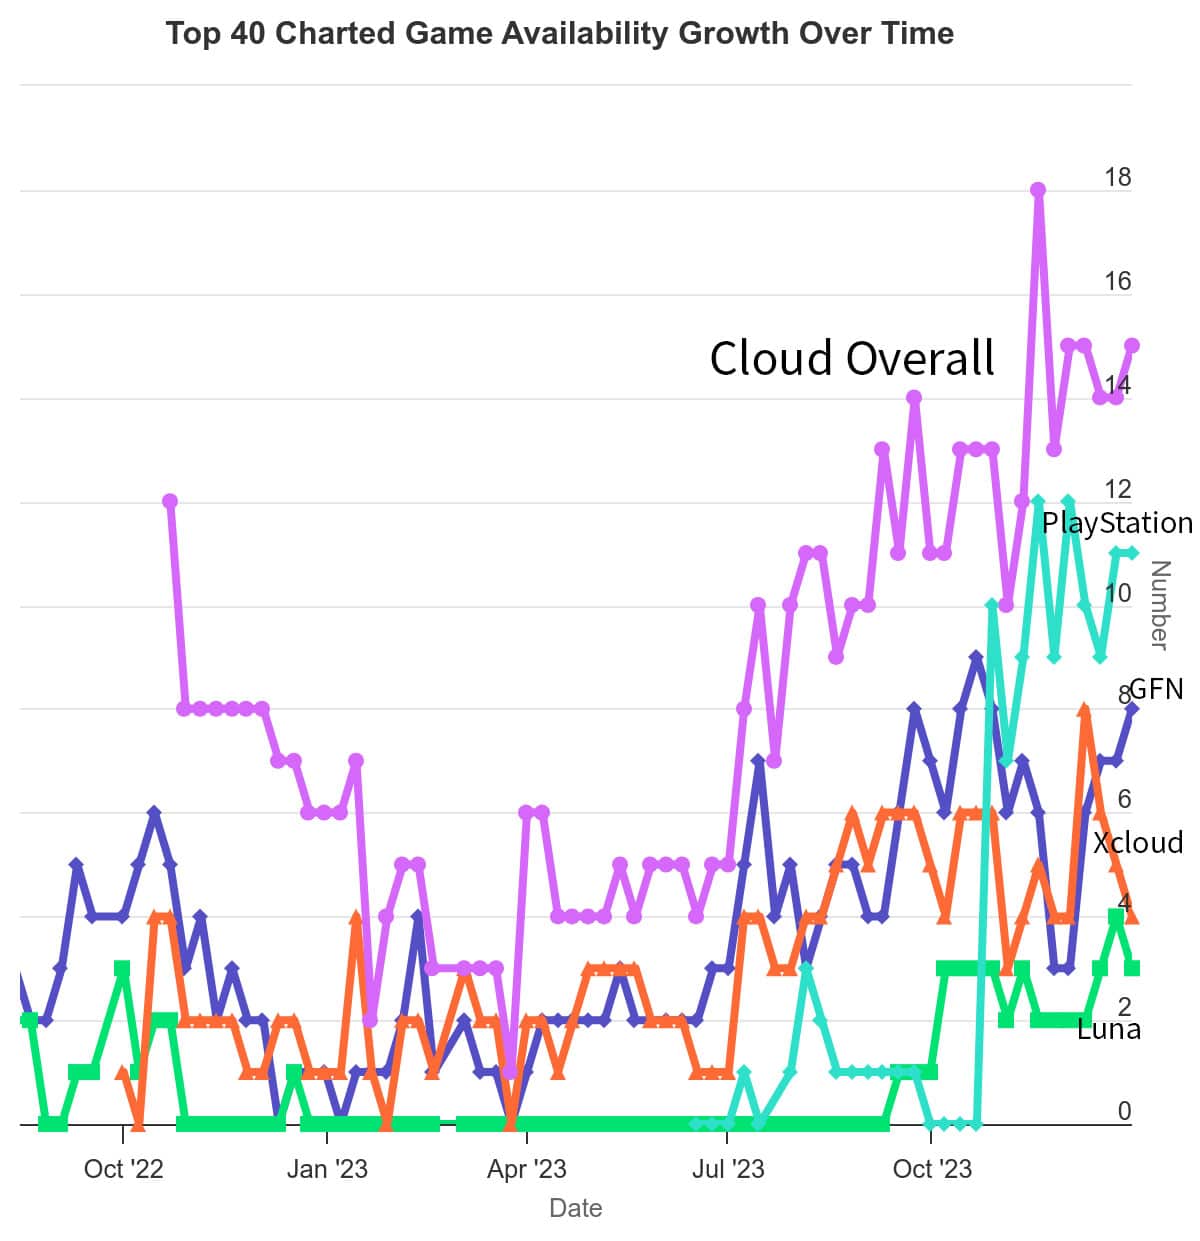 Charting Games Availability in the Cloud Over Time